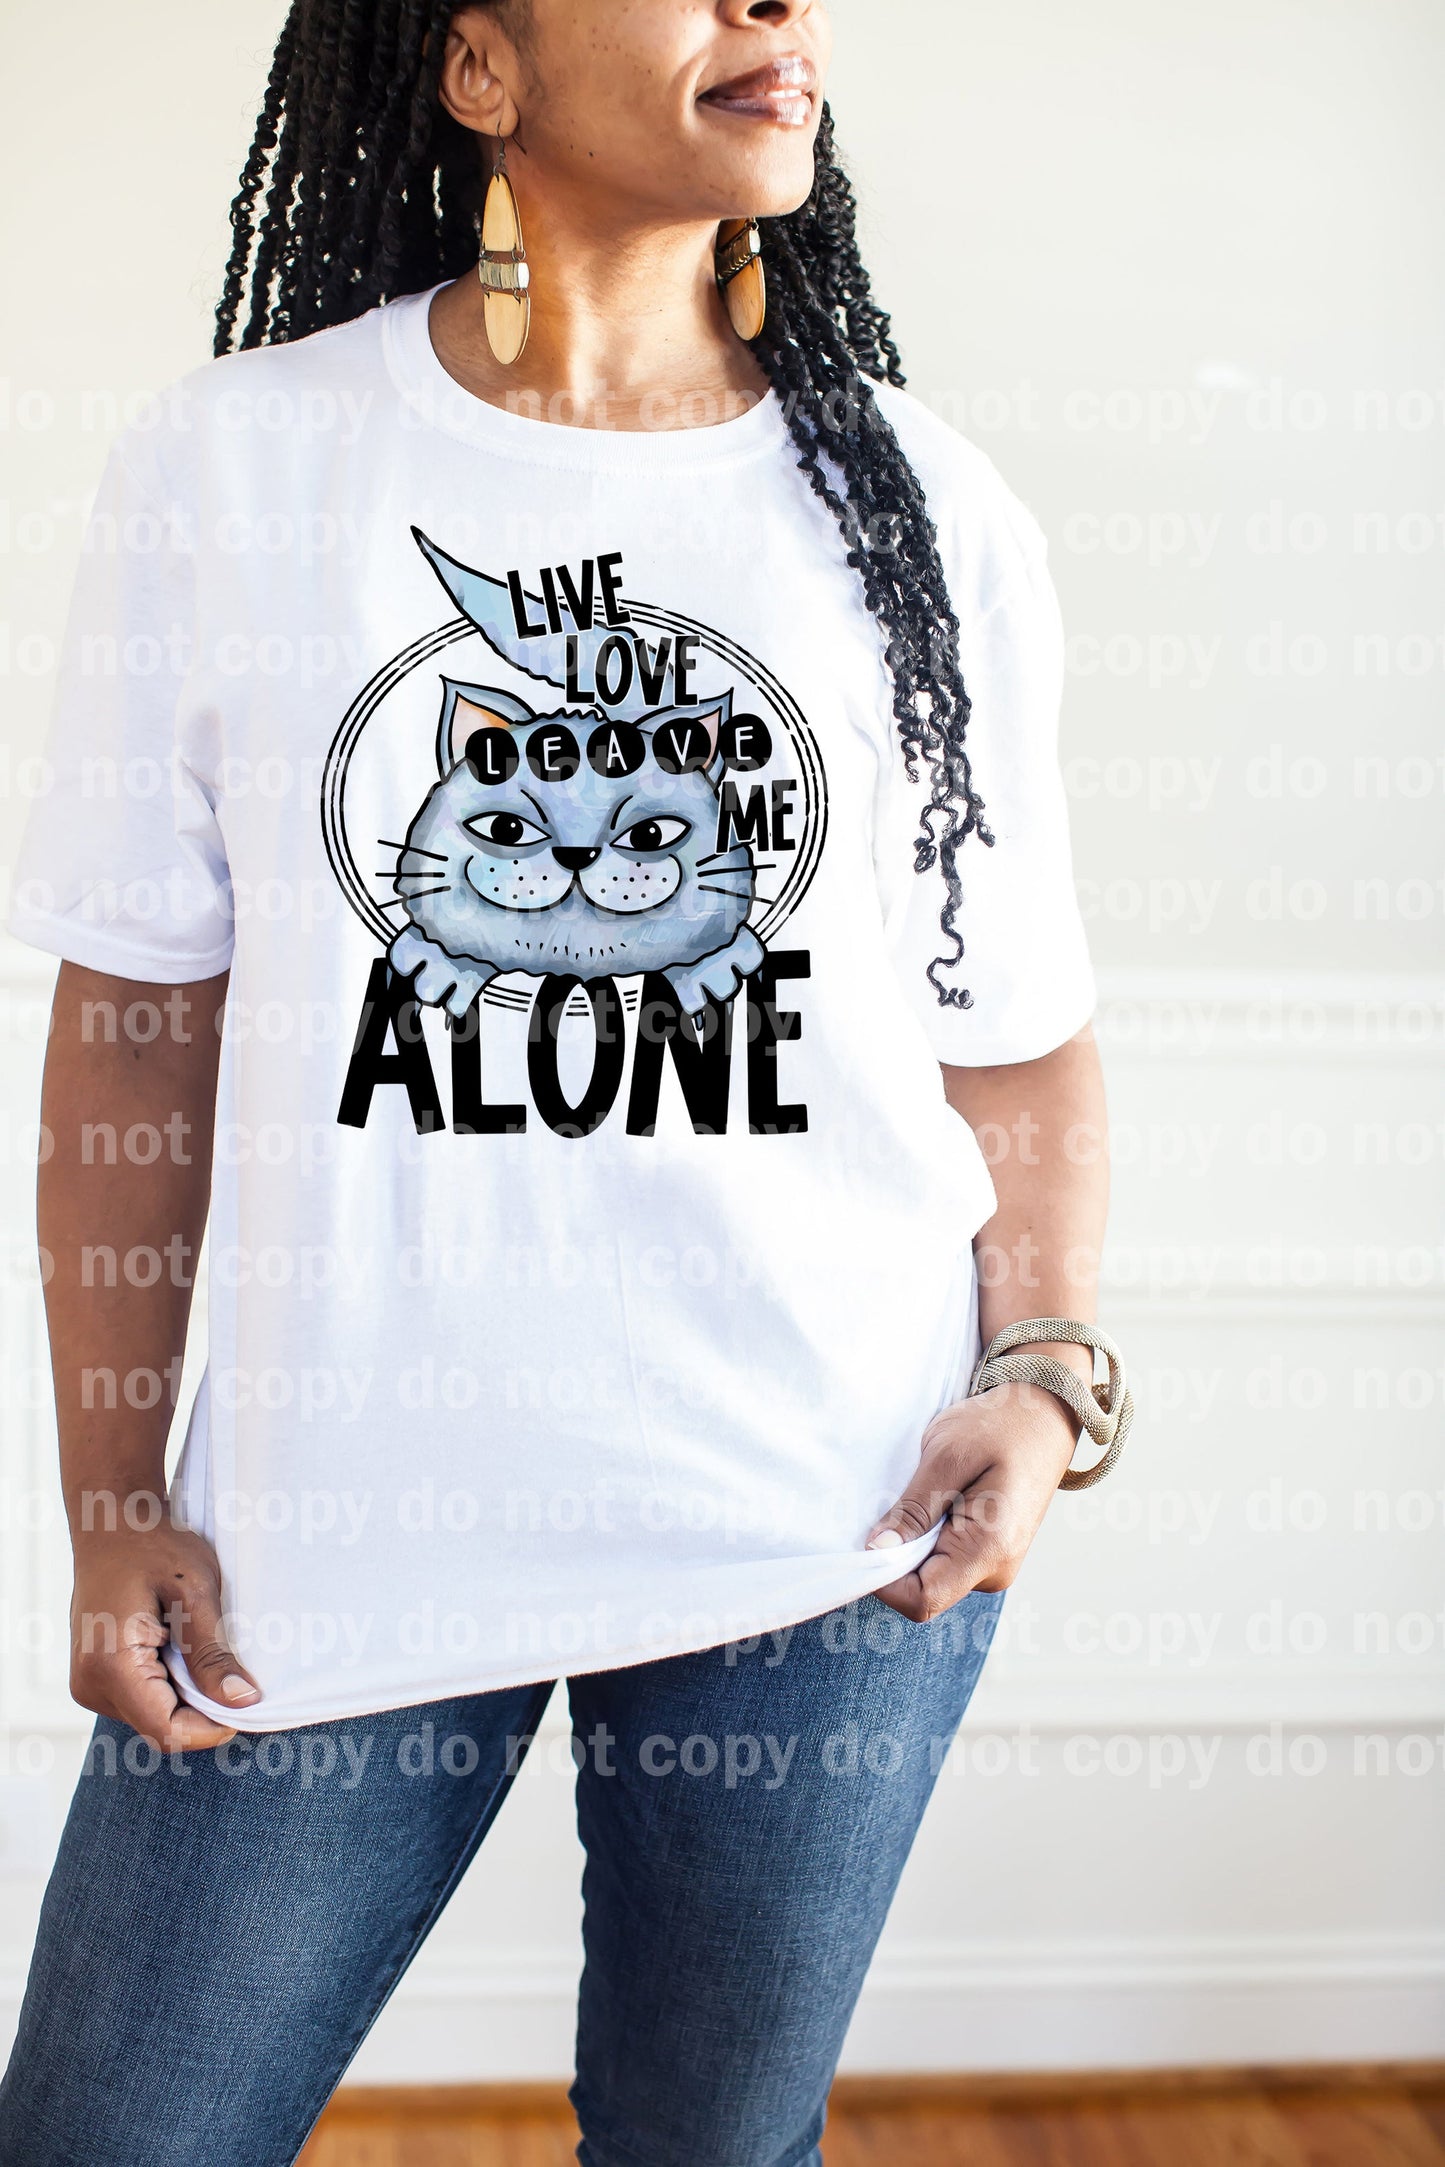 Live Love Leave Me Alone Dream Print or Sublimation Print